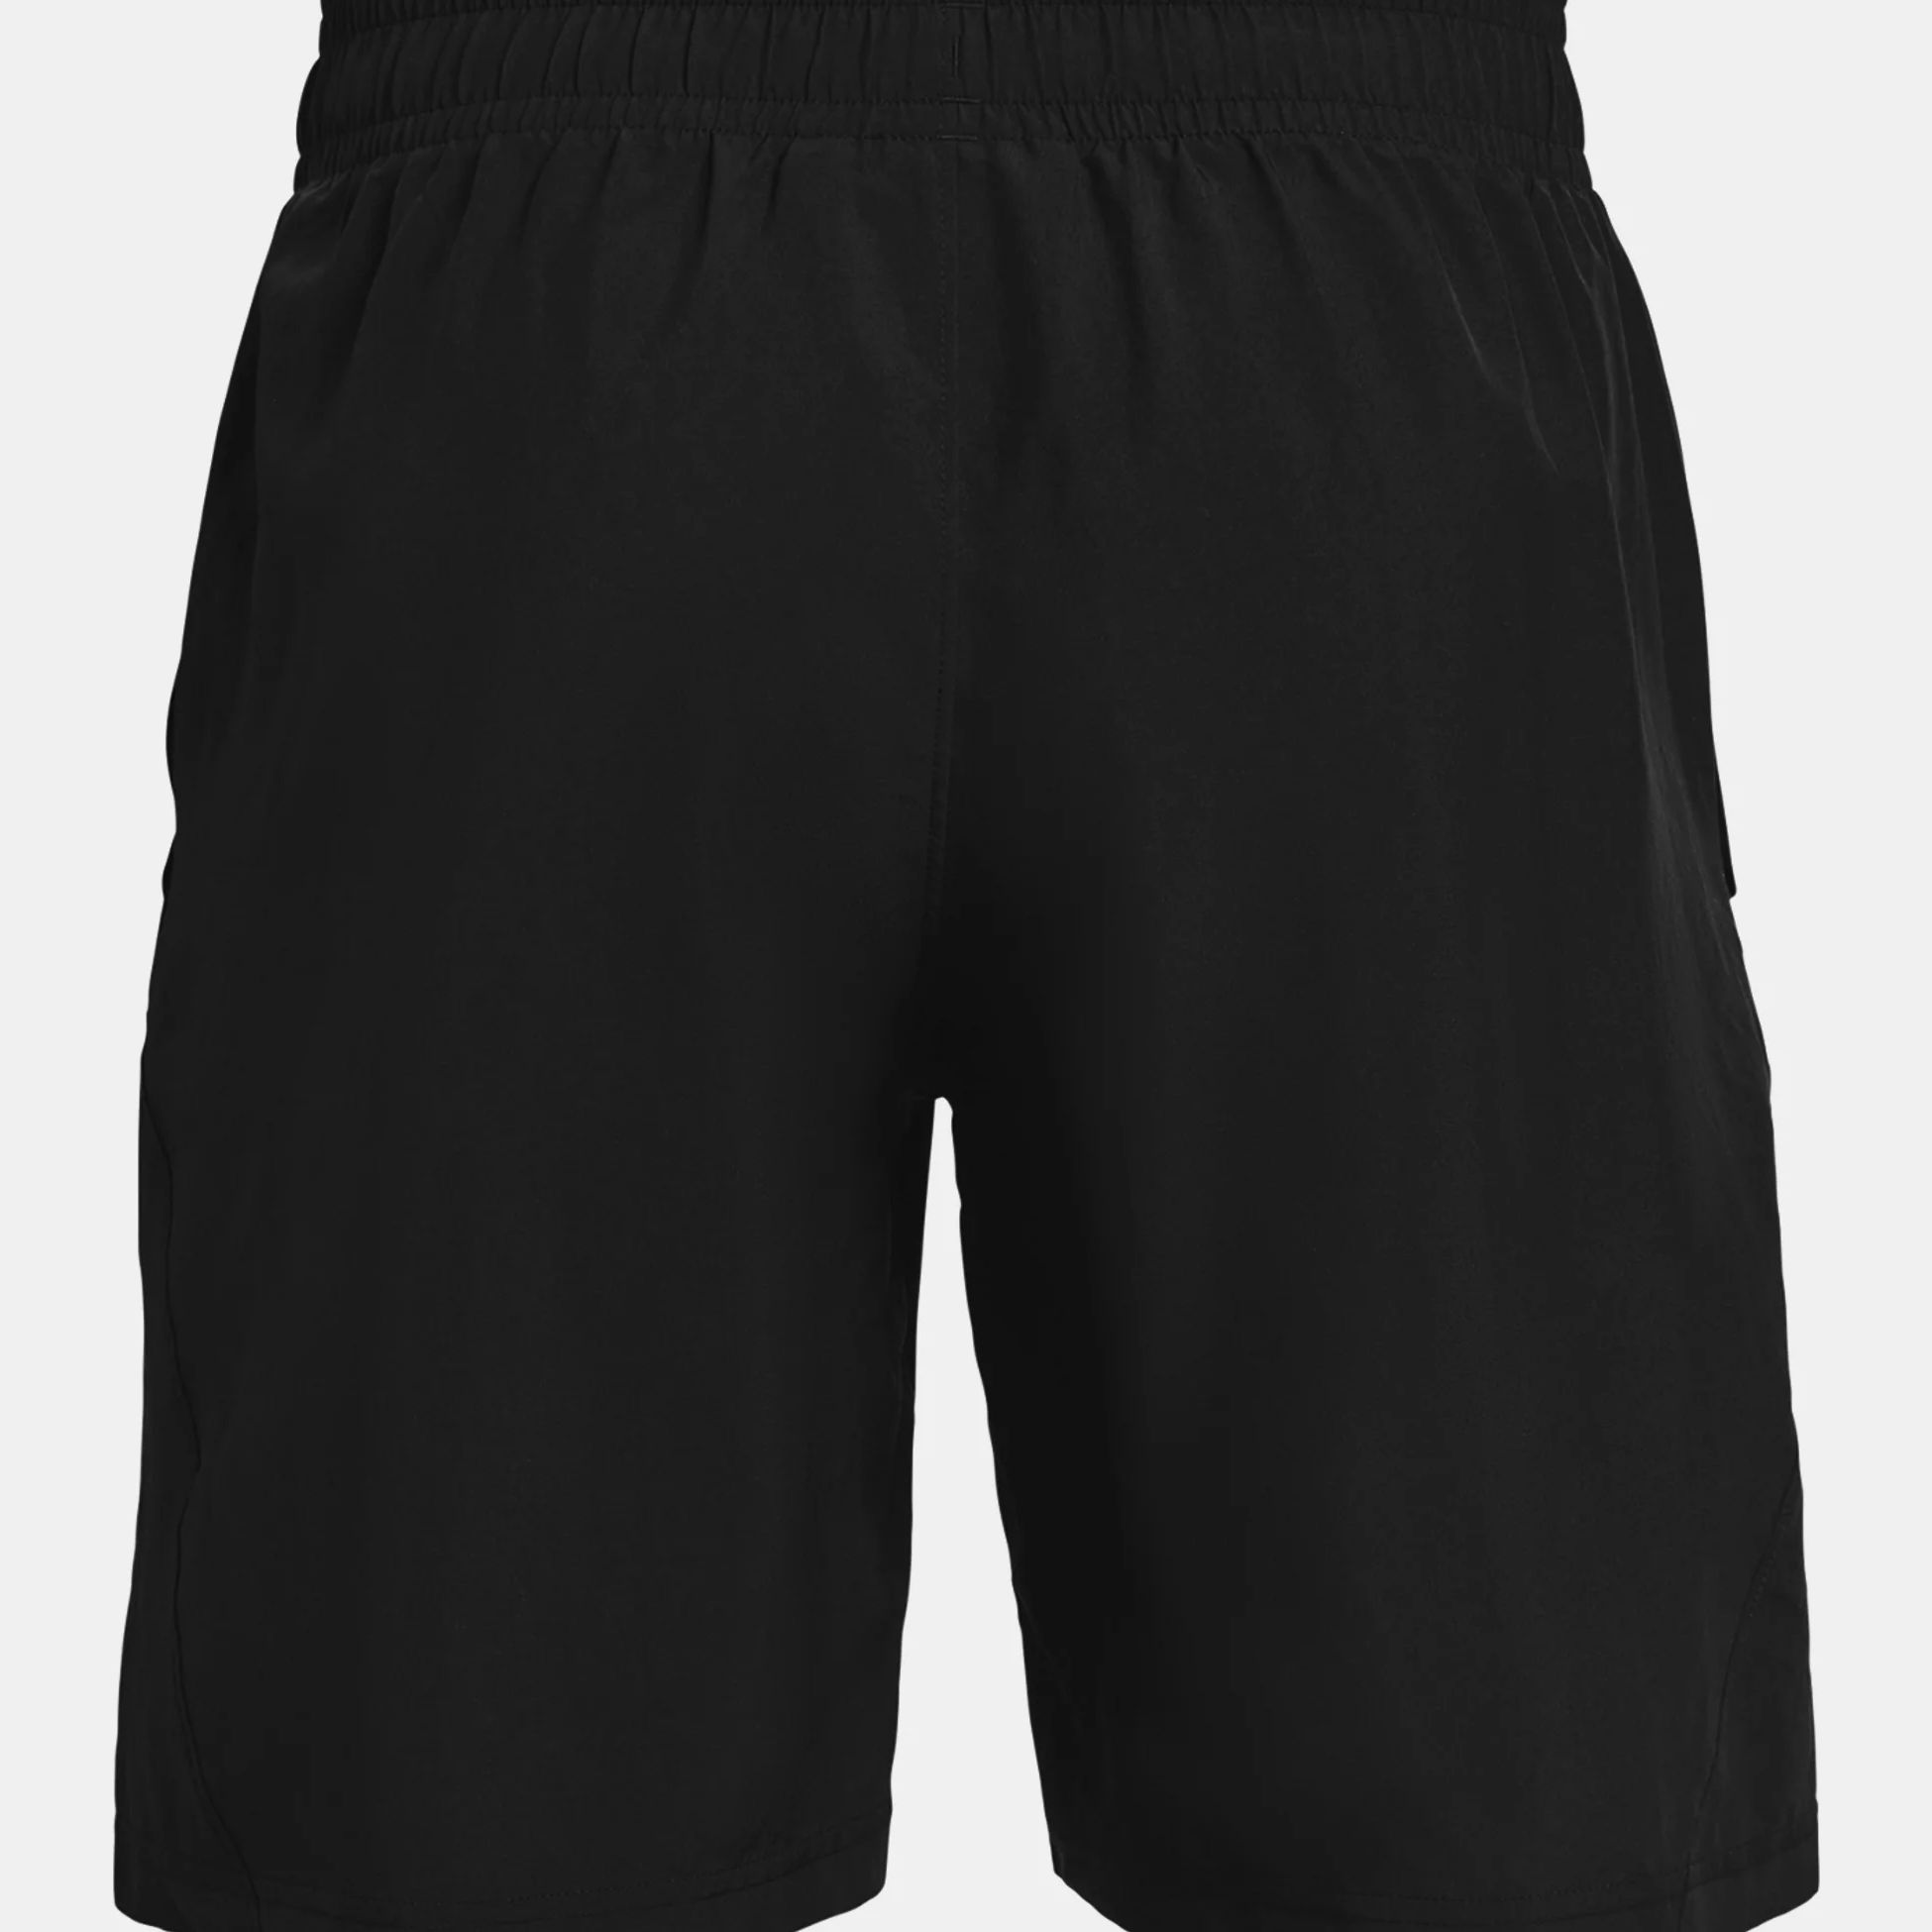 Shorts -  under armour UA Woven Graphic Wordmark Shorts